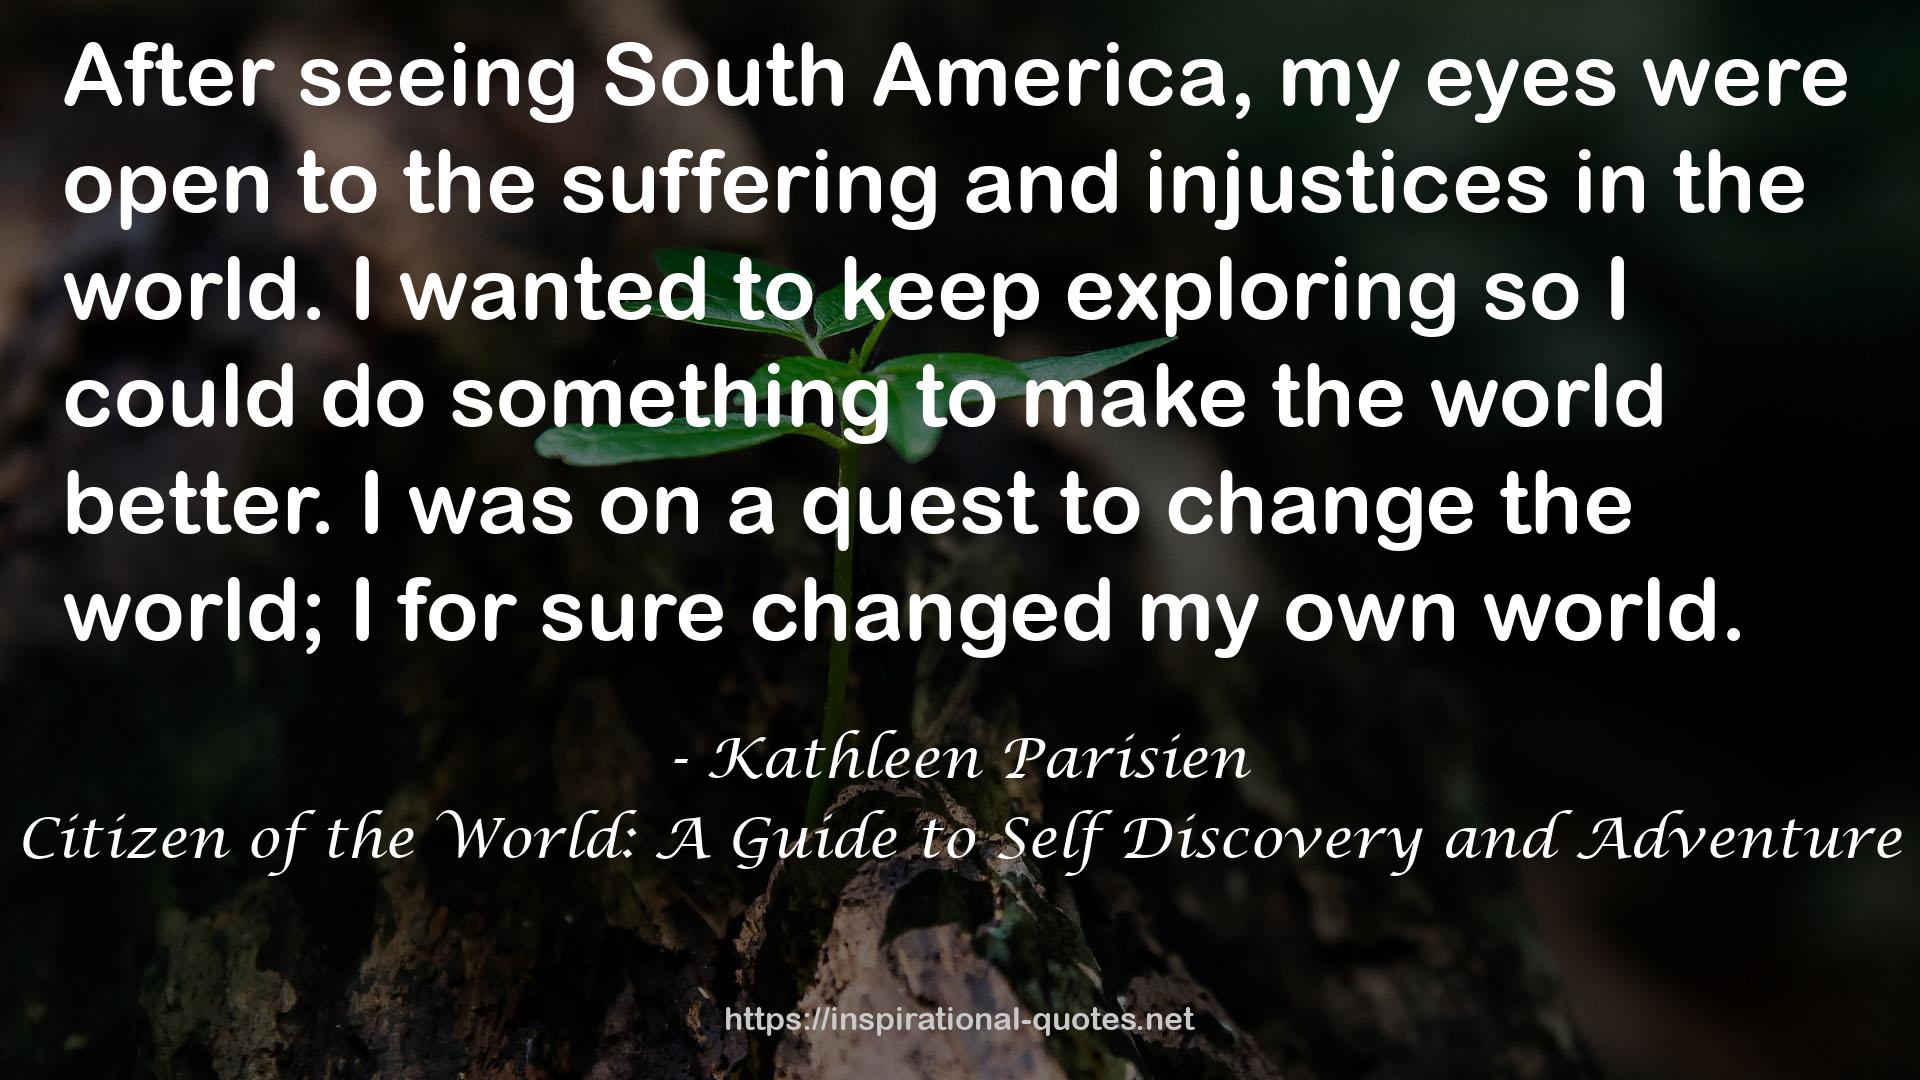 Citizen of the World: A Guide to Self Discovery and Adventure QUOTES